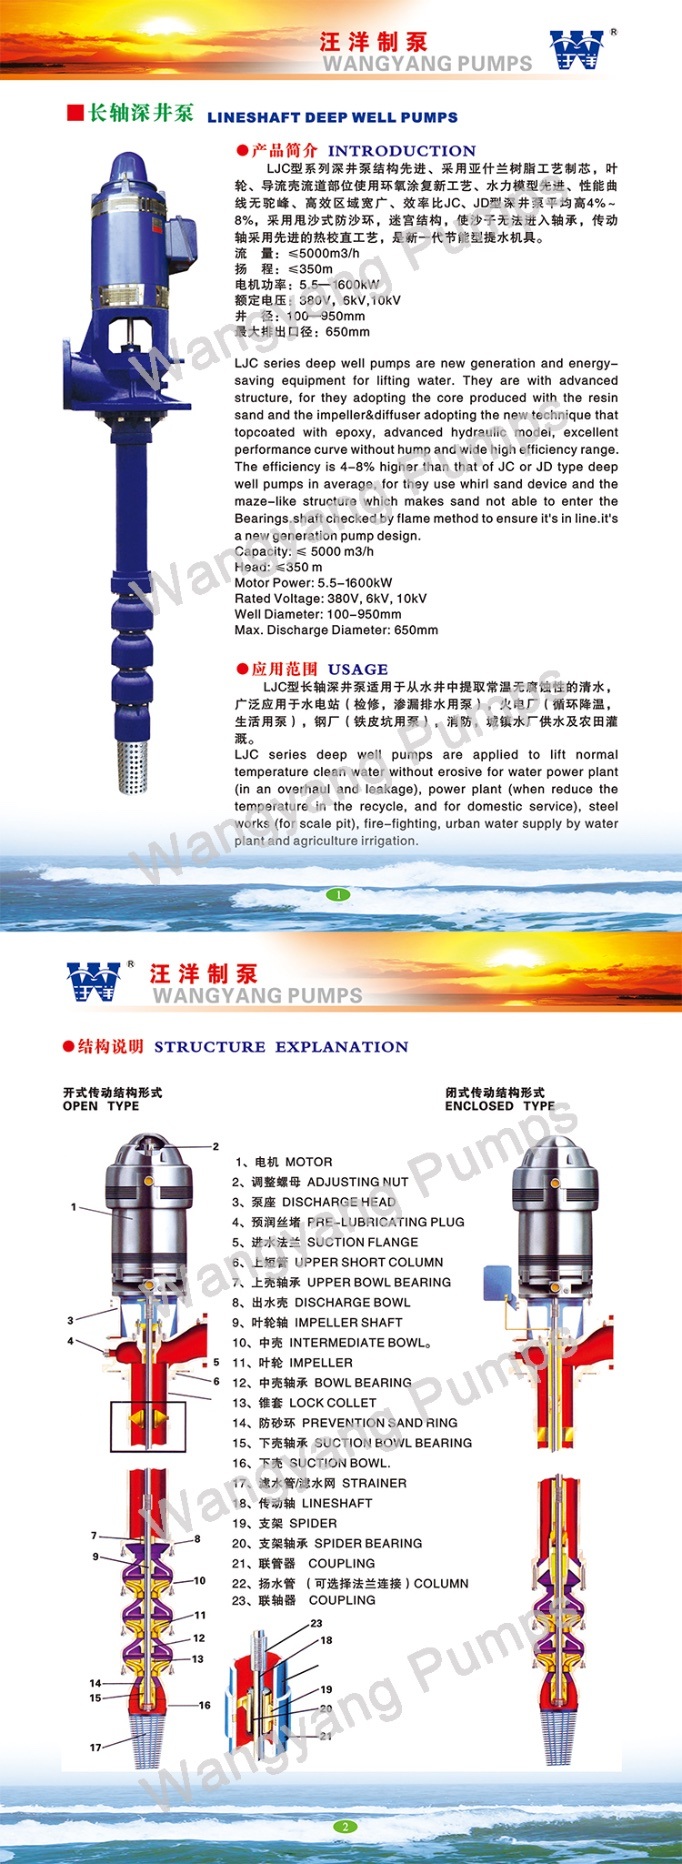 Electrical Multistage Lineshaft Vertical Turbine Deep Well Centrifugal Pump